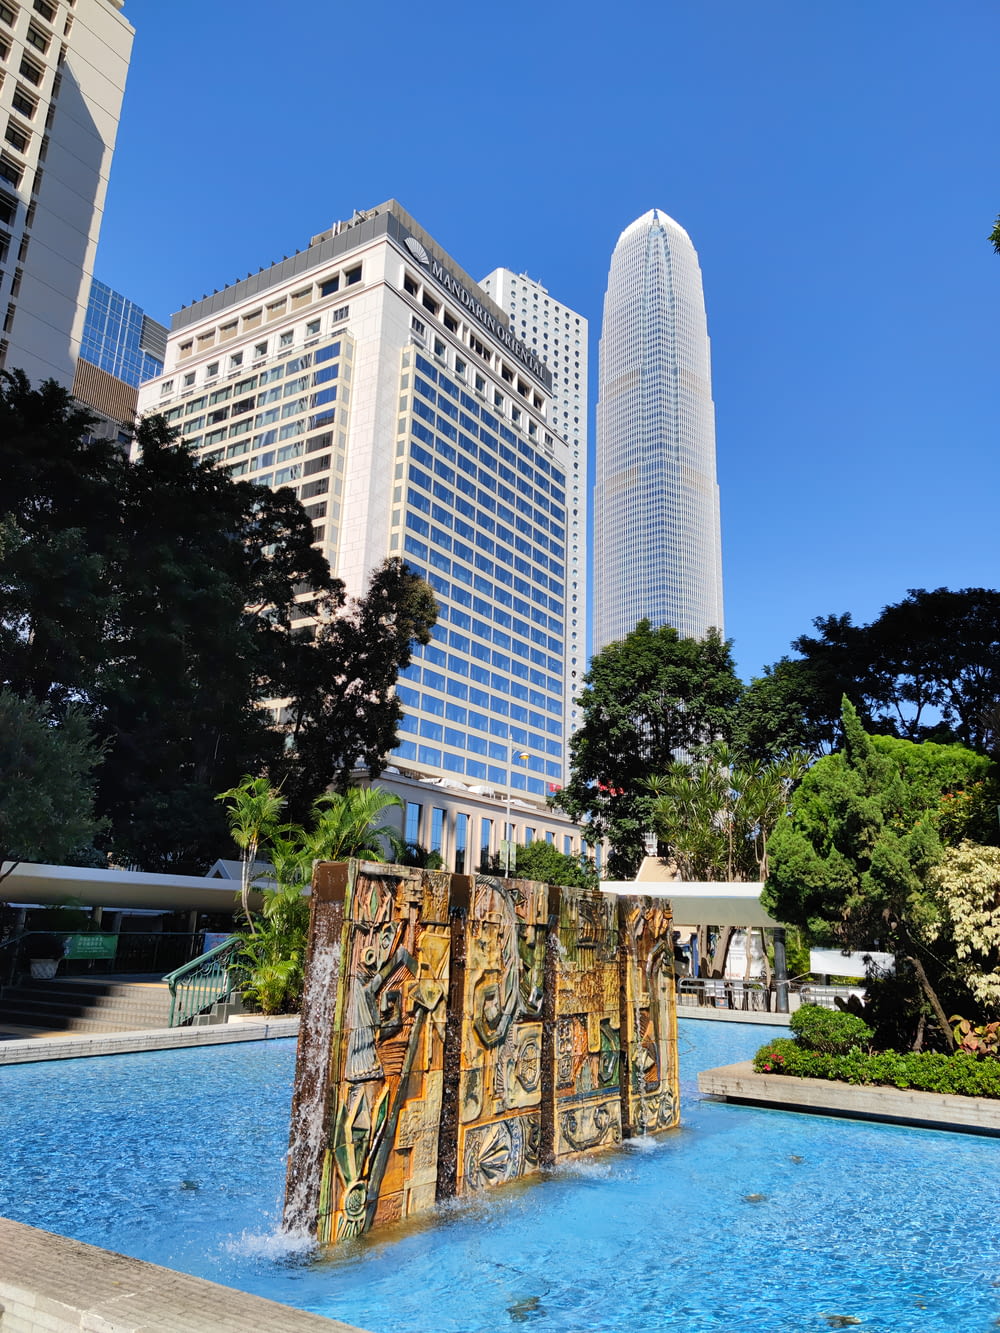 a fountain in the middle of a park with tall buildings in the background